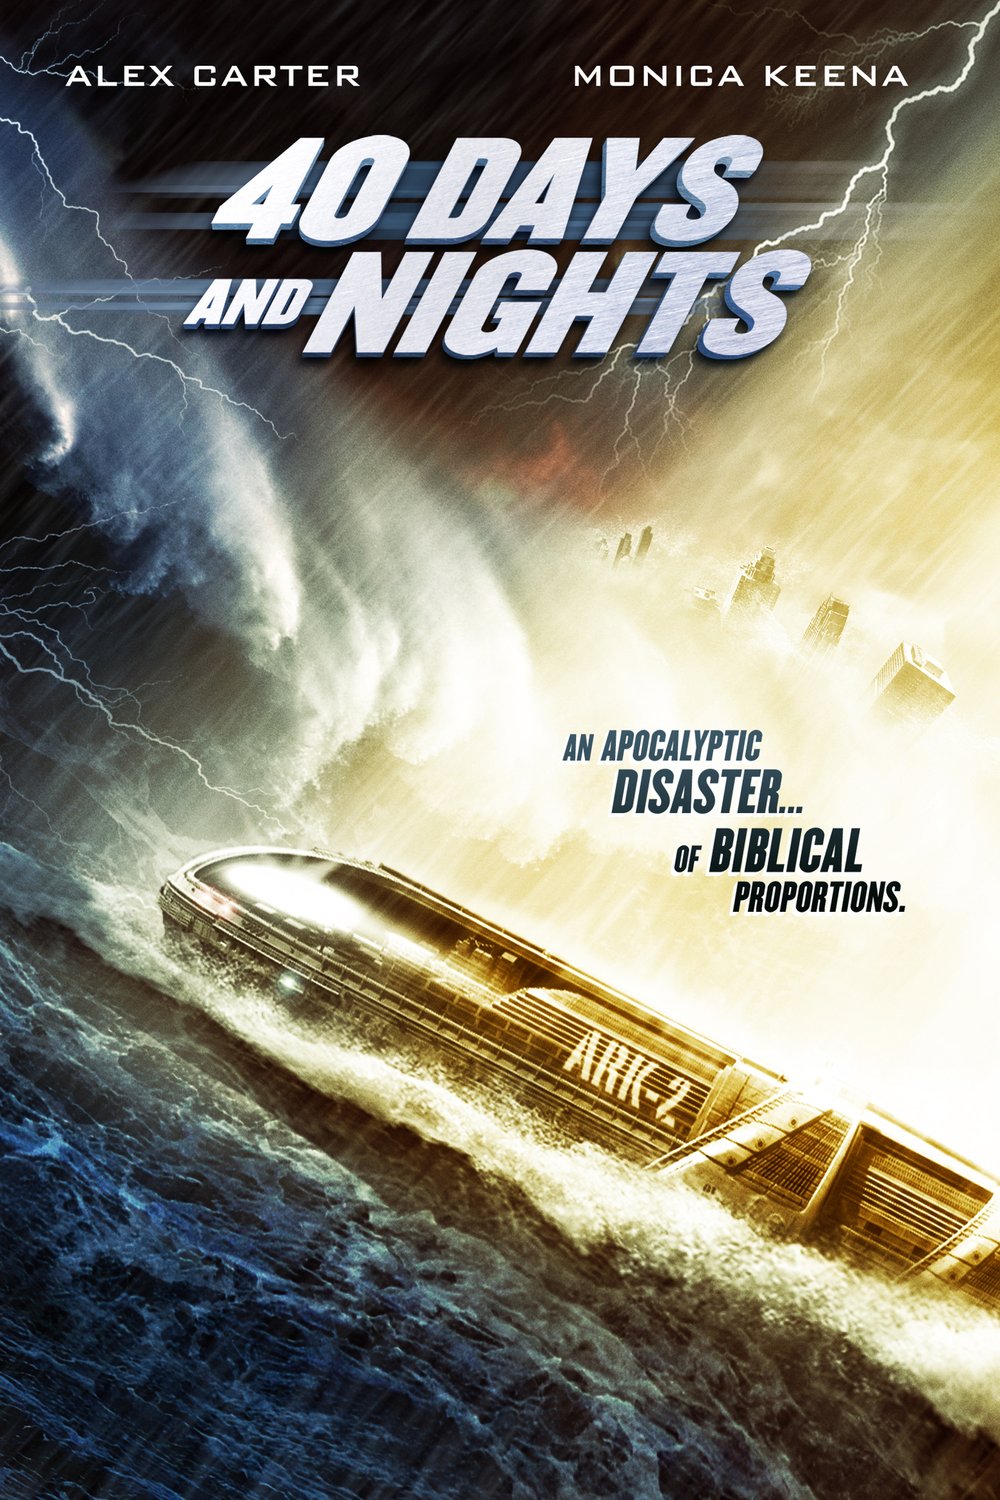 Poster of the movie 40 Days and Nights